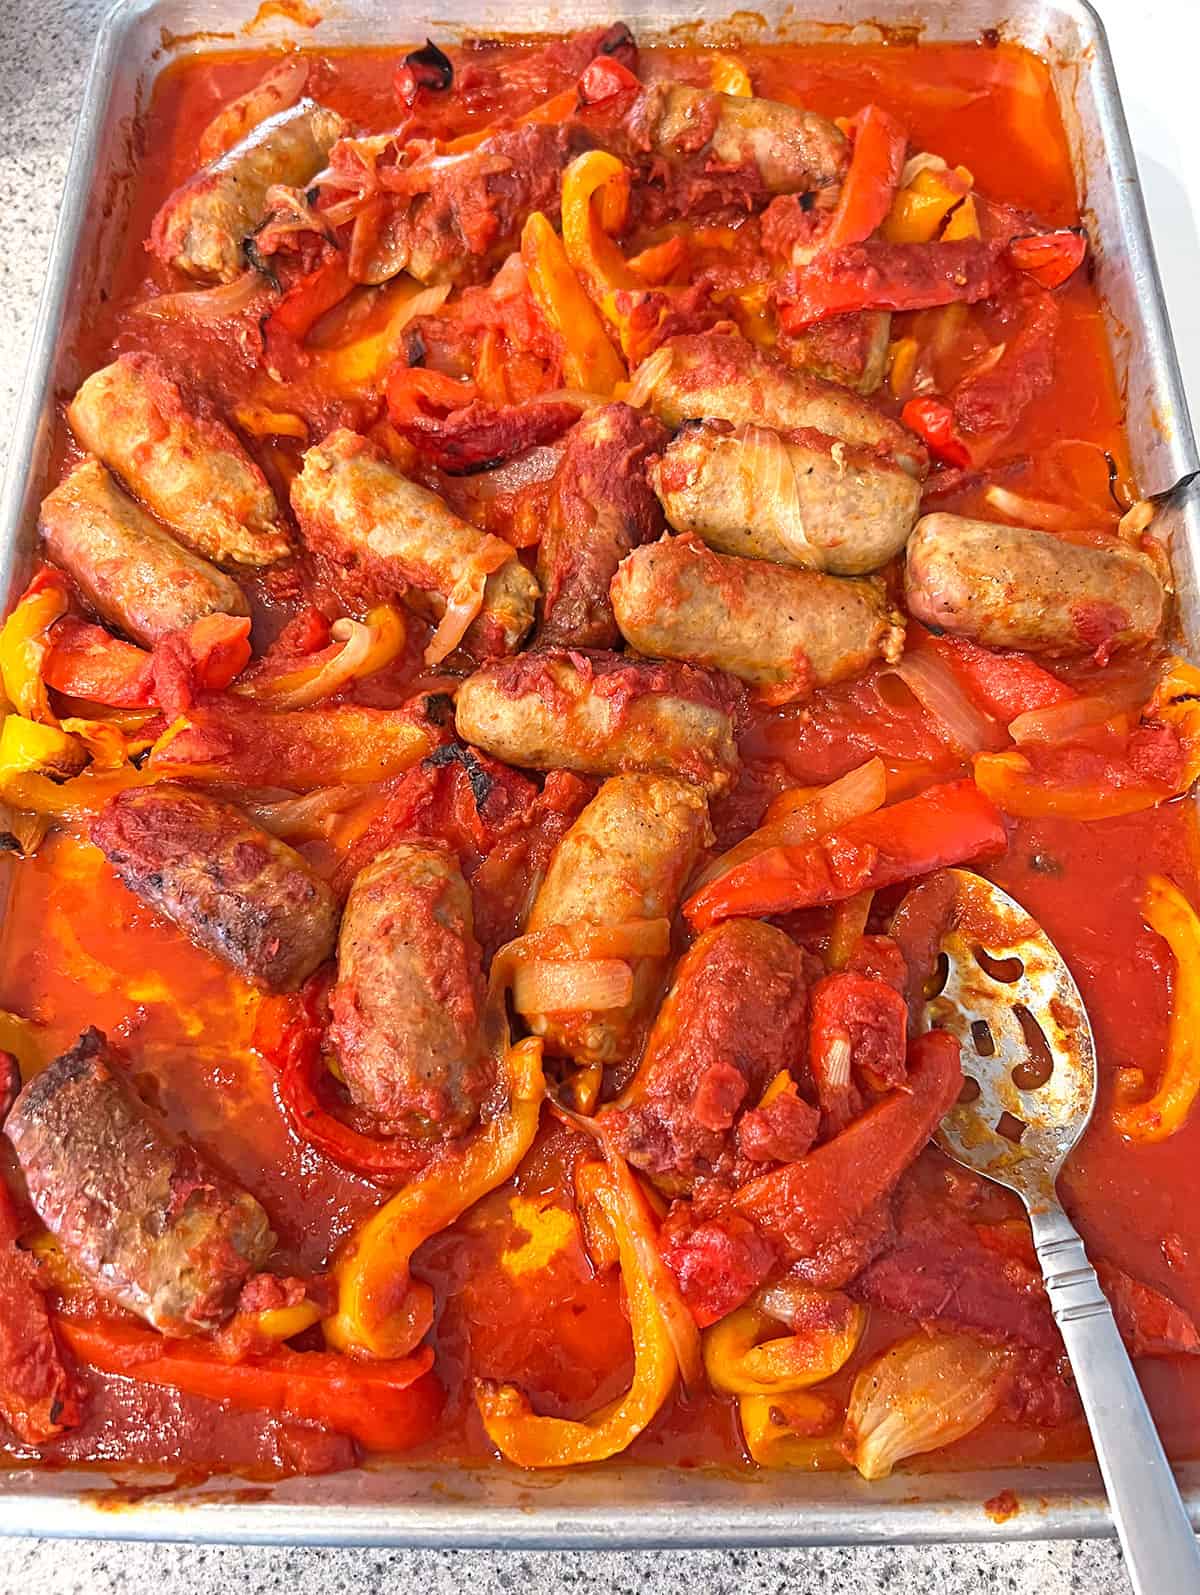 sheet pan with roasted Italian sausage, peppers and onions in tomato sauce.